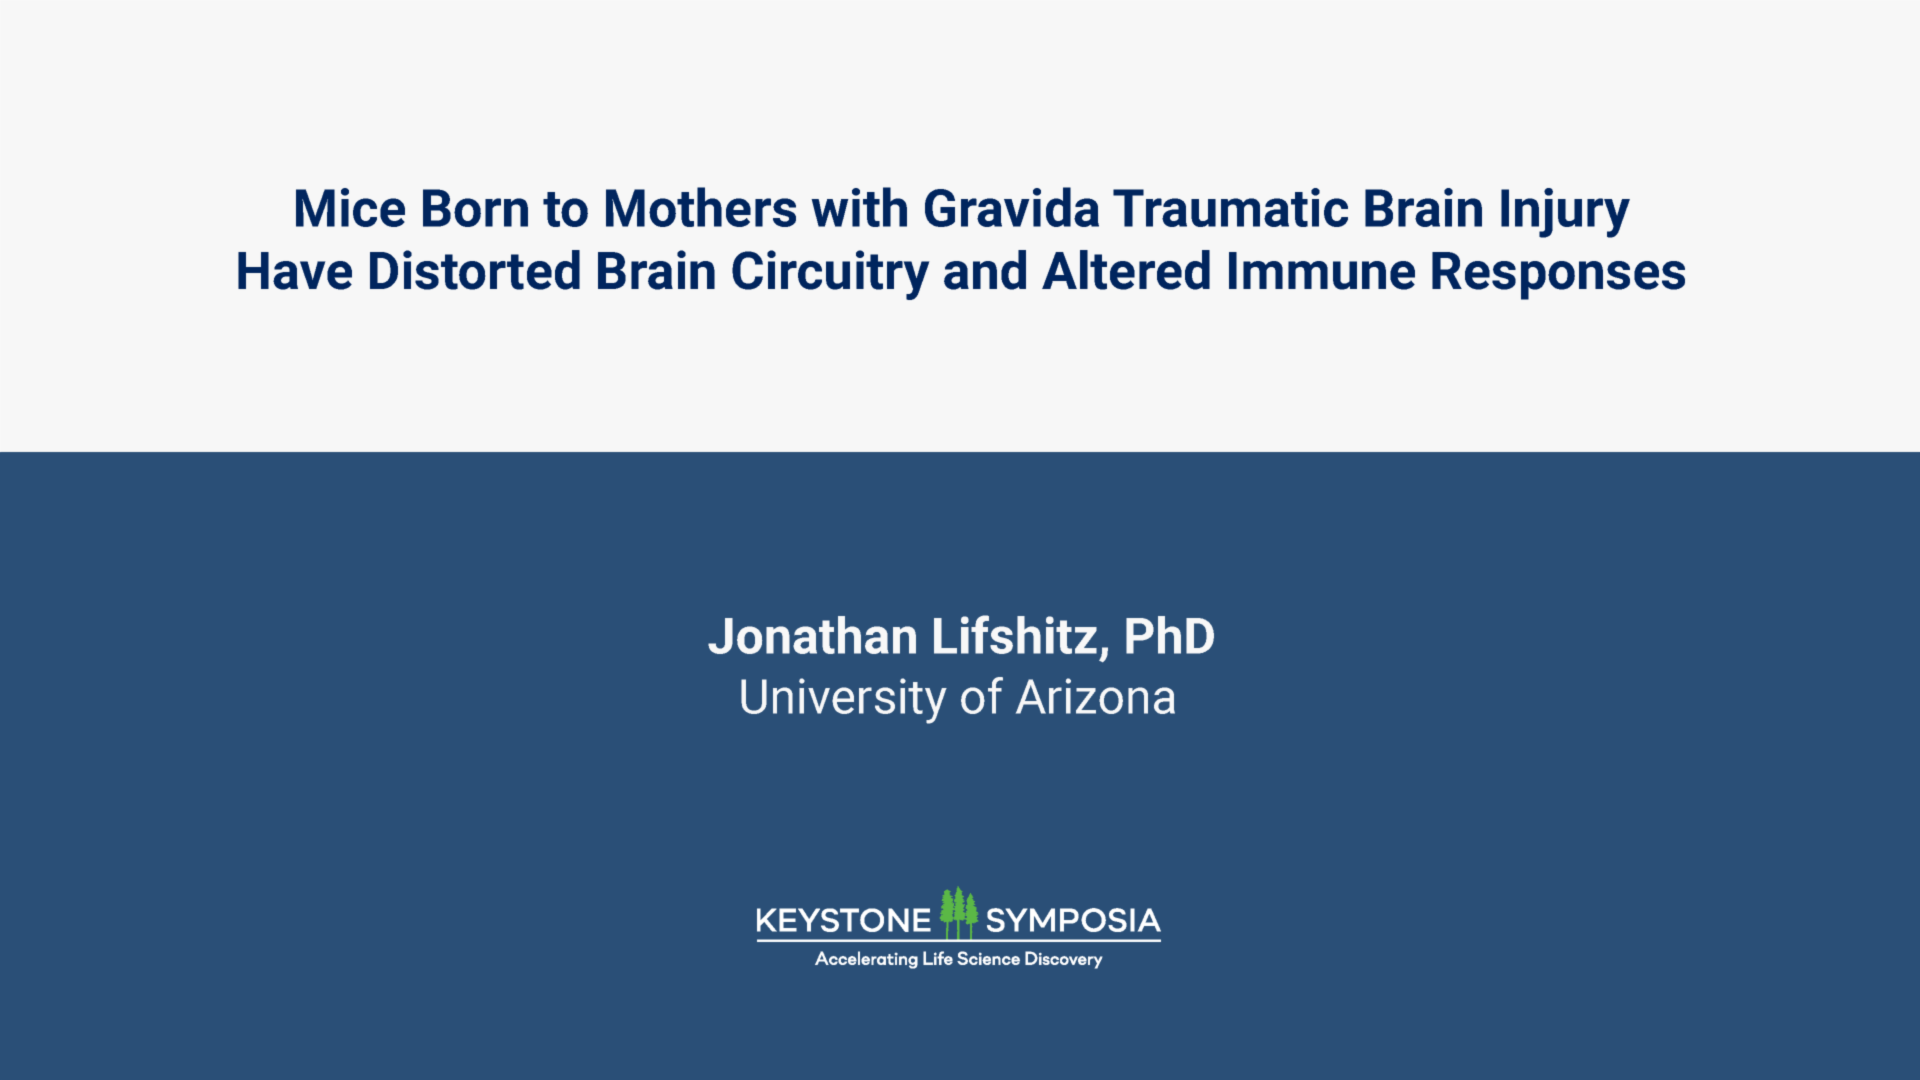 Mice Born to Mothers with Gravida Traumatic Brain Injury Have Distorted Brain Circuitry and Altered Immune Responses icon